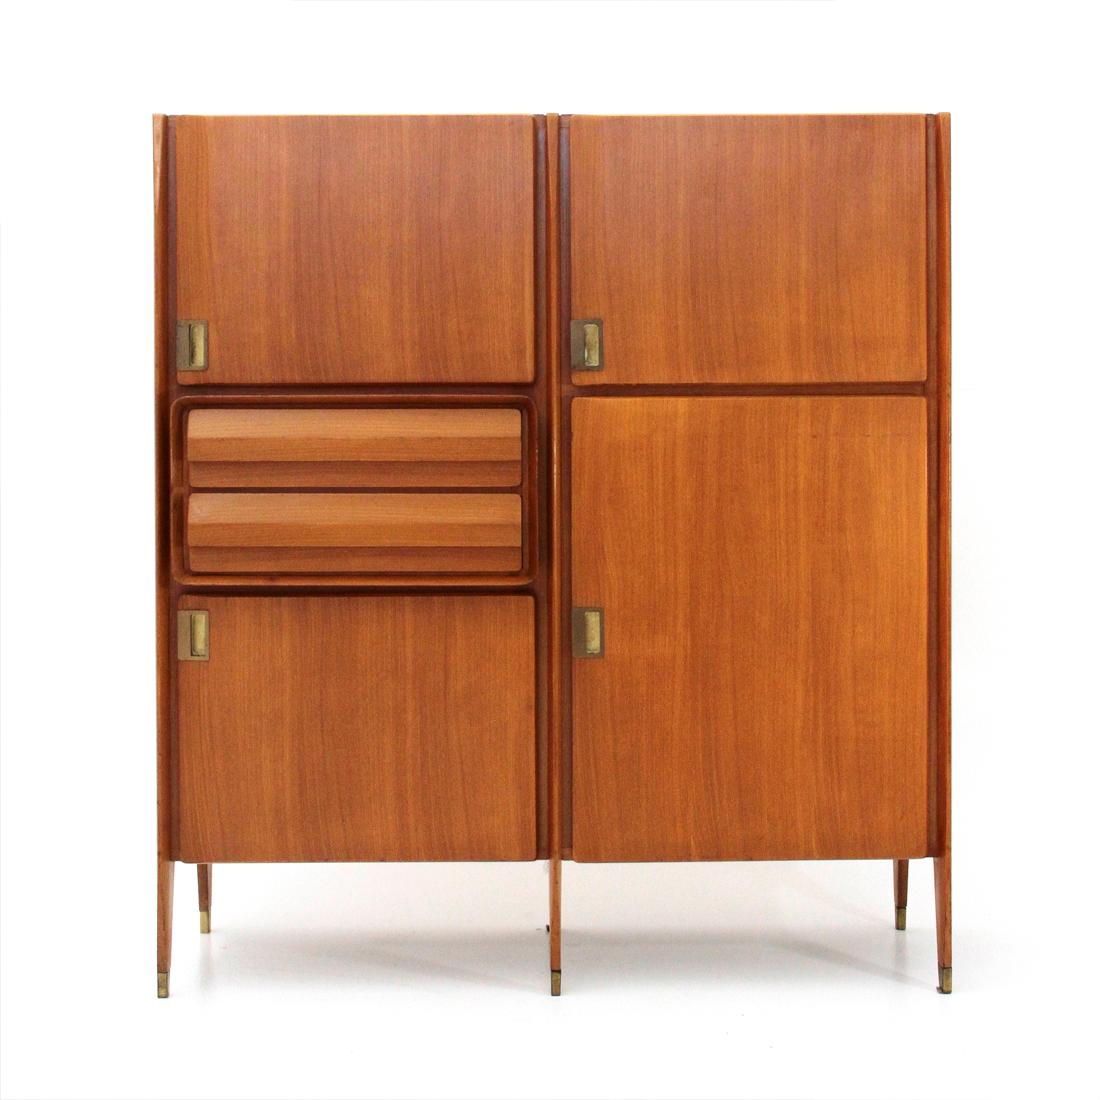 Sideboard produced in the 1950s by Consorzio Esposizione Mobili Cantù.
Wood veneered uprights with tapered front edges and brass feet.
Wood veneer storage compartments with door closure, brass handle and glass shelves.
Two drawers with solid wood